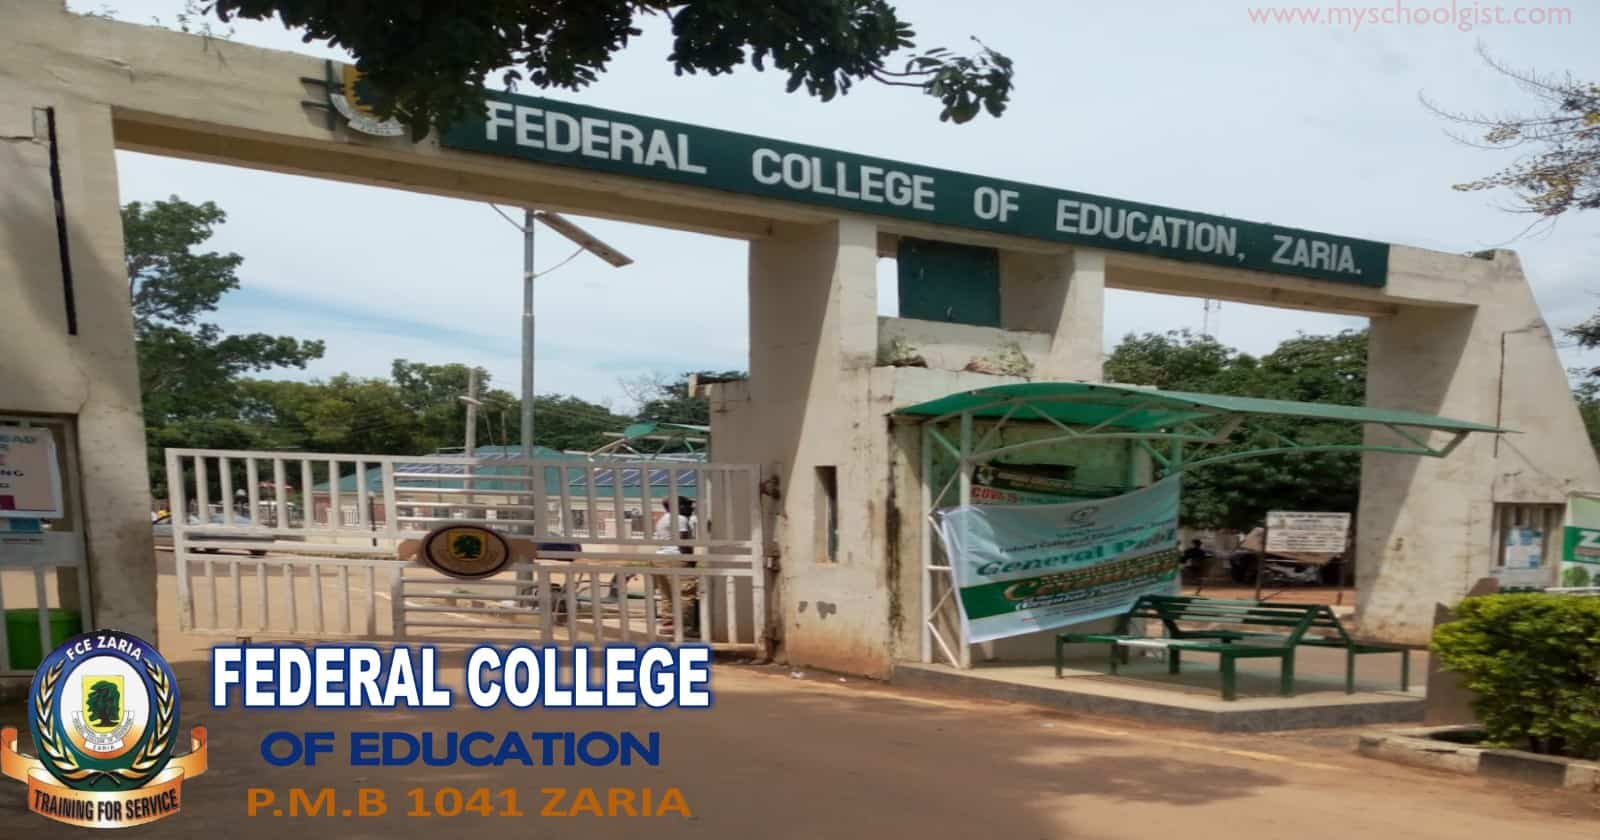 School Tuition at the Federal College of Education (FCE) in Zaria